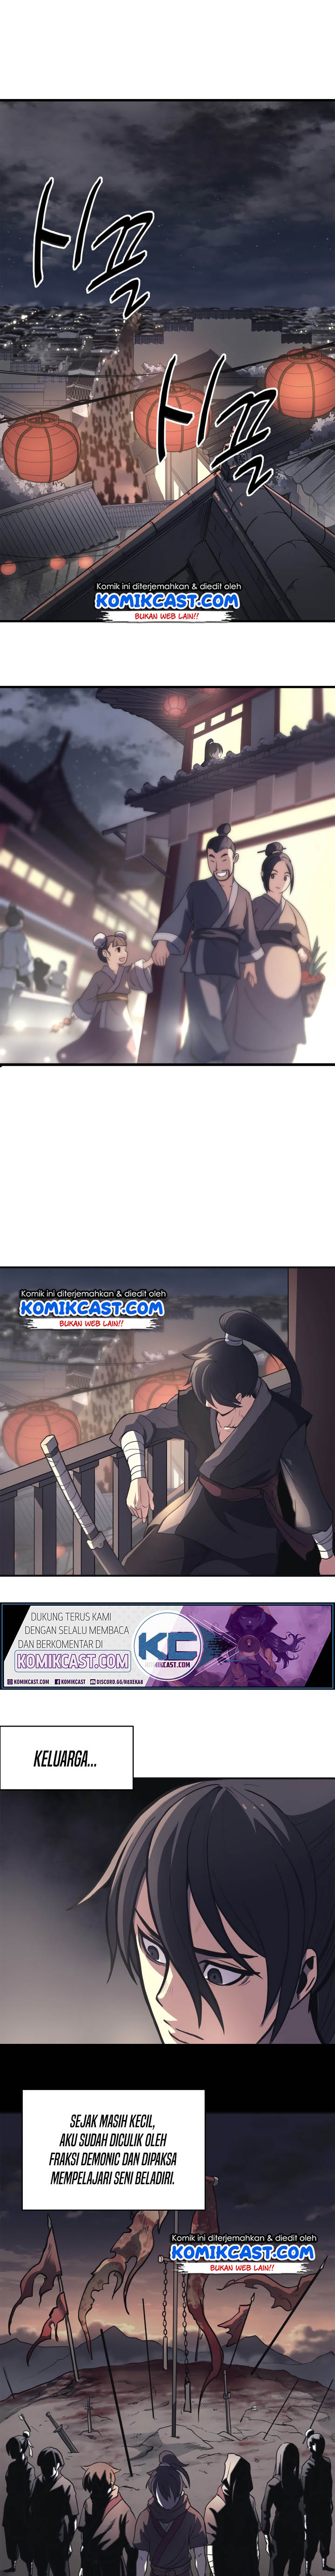 Mookhyang The Origin Chapter 01 13